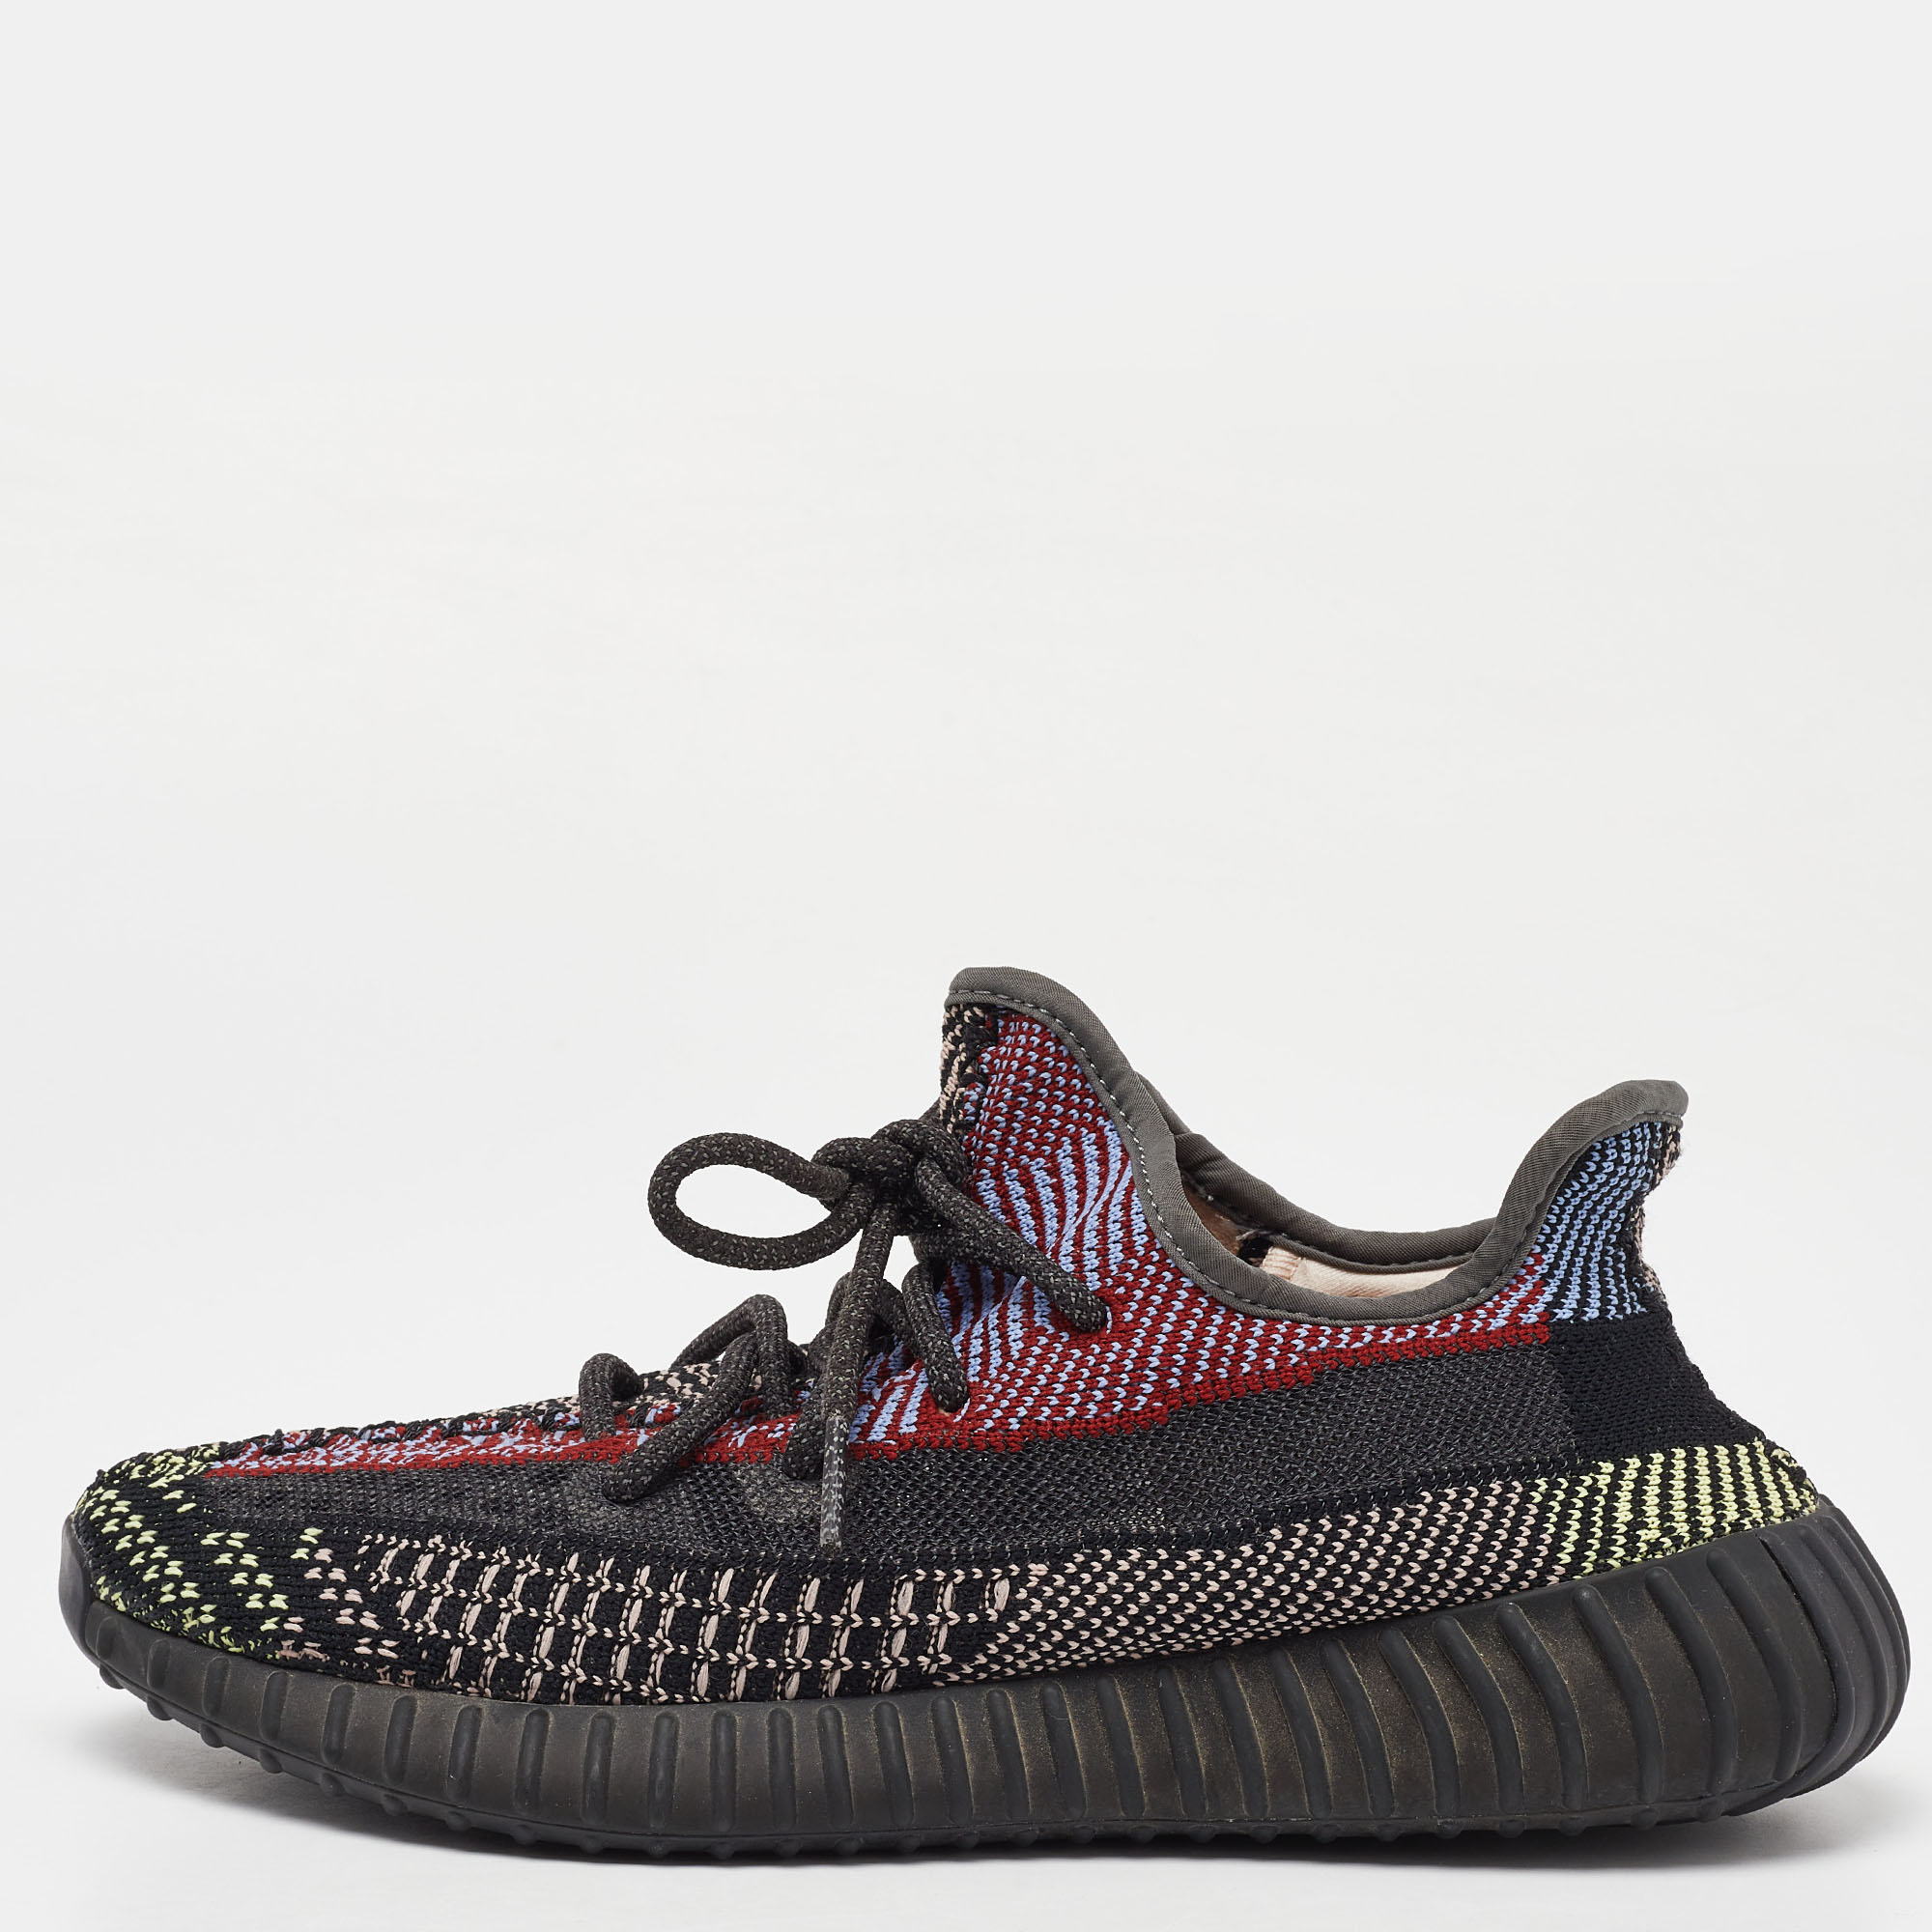 

Yeezy x Adidas Multicolor Knit Fabric Boost 350 V2 Yecheil Low Top Sneakers Size, Black